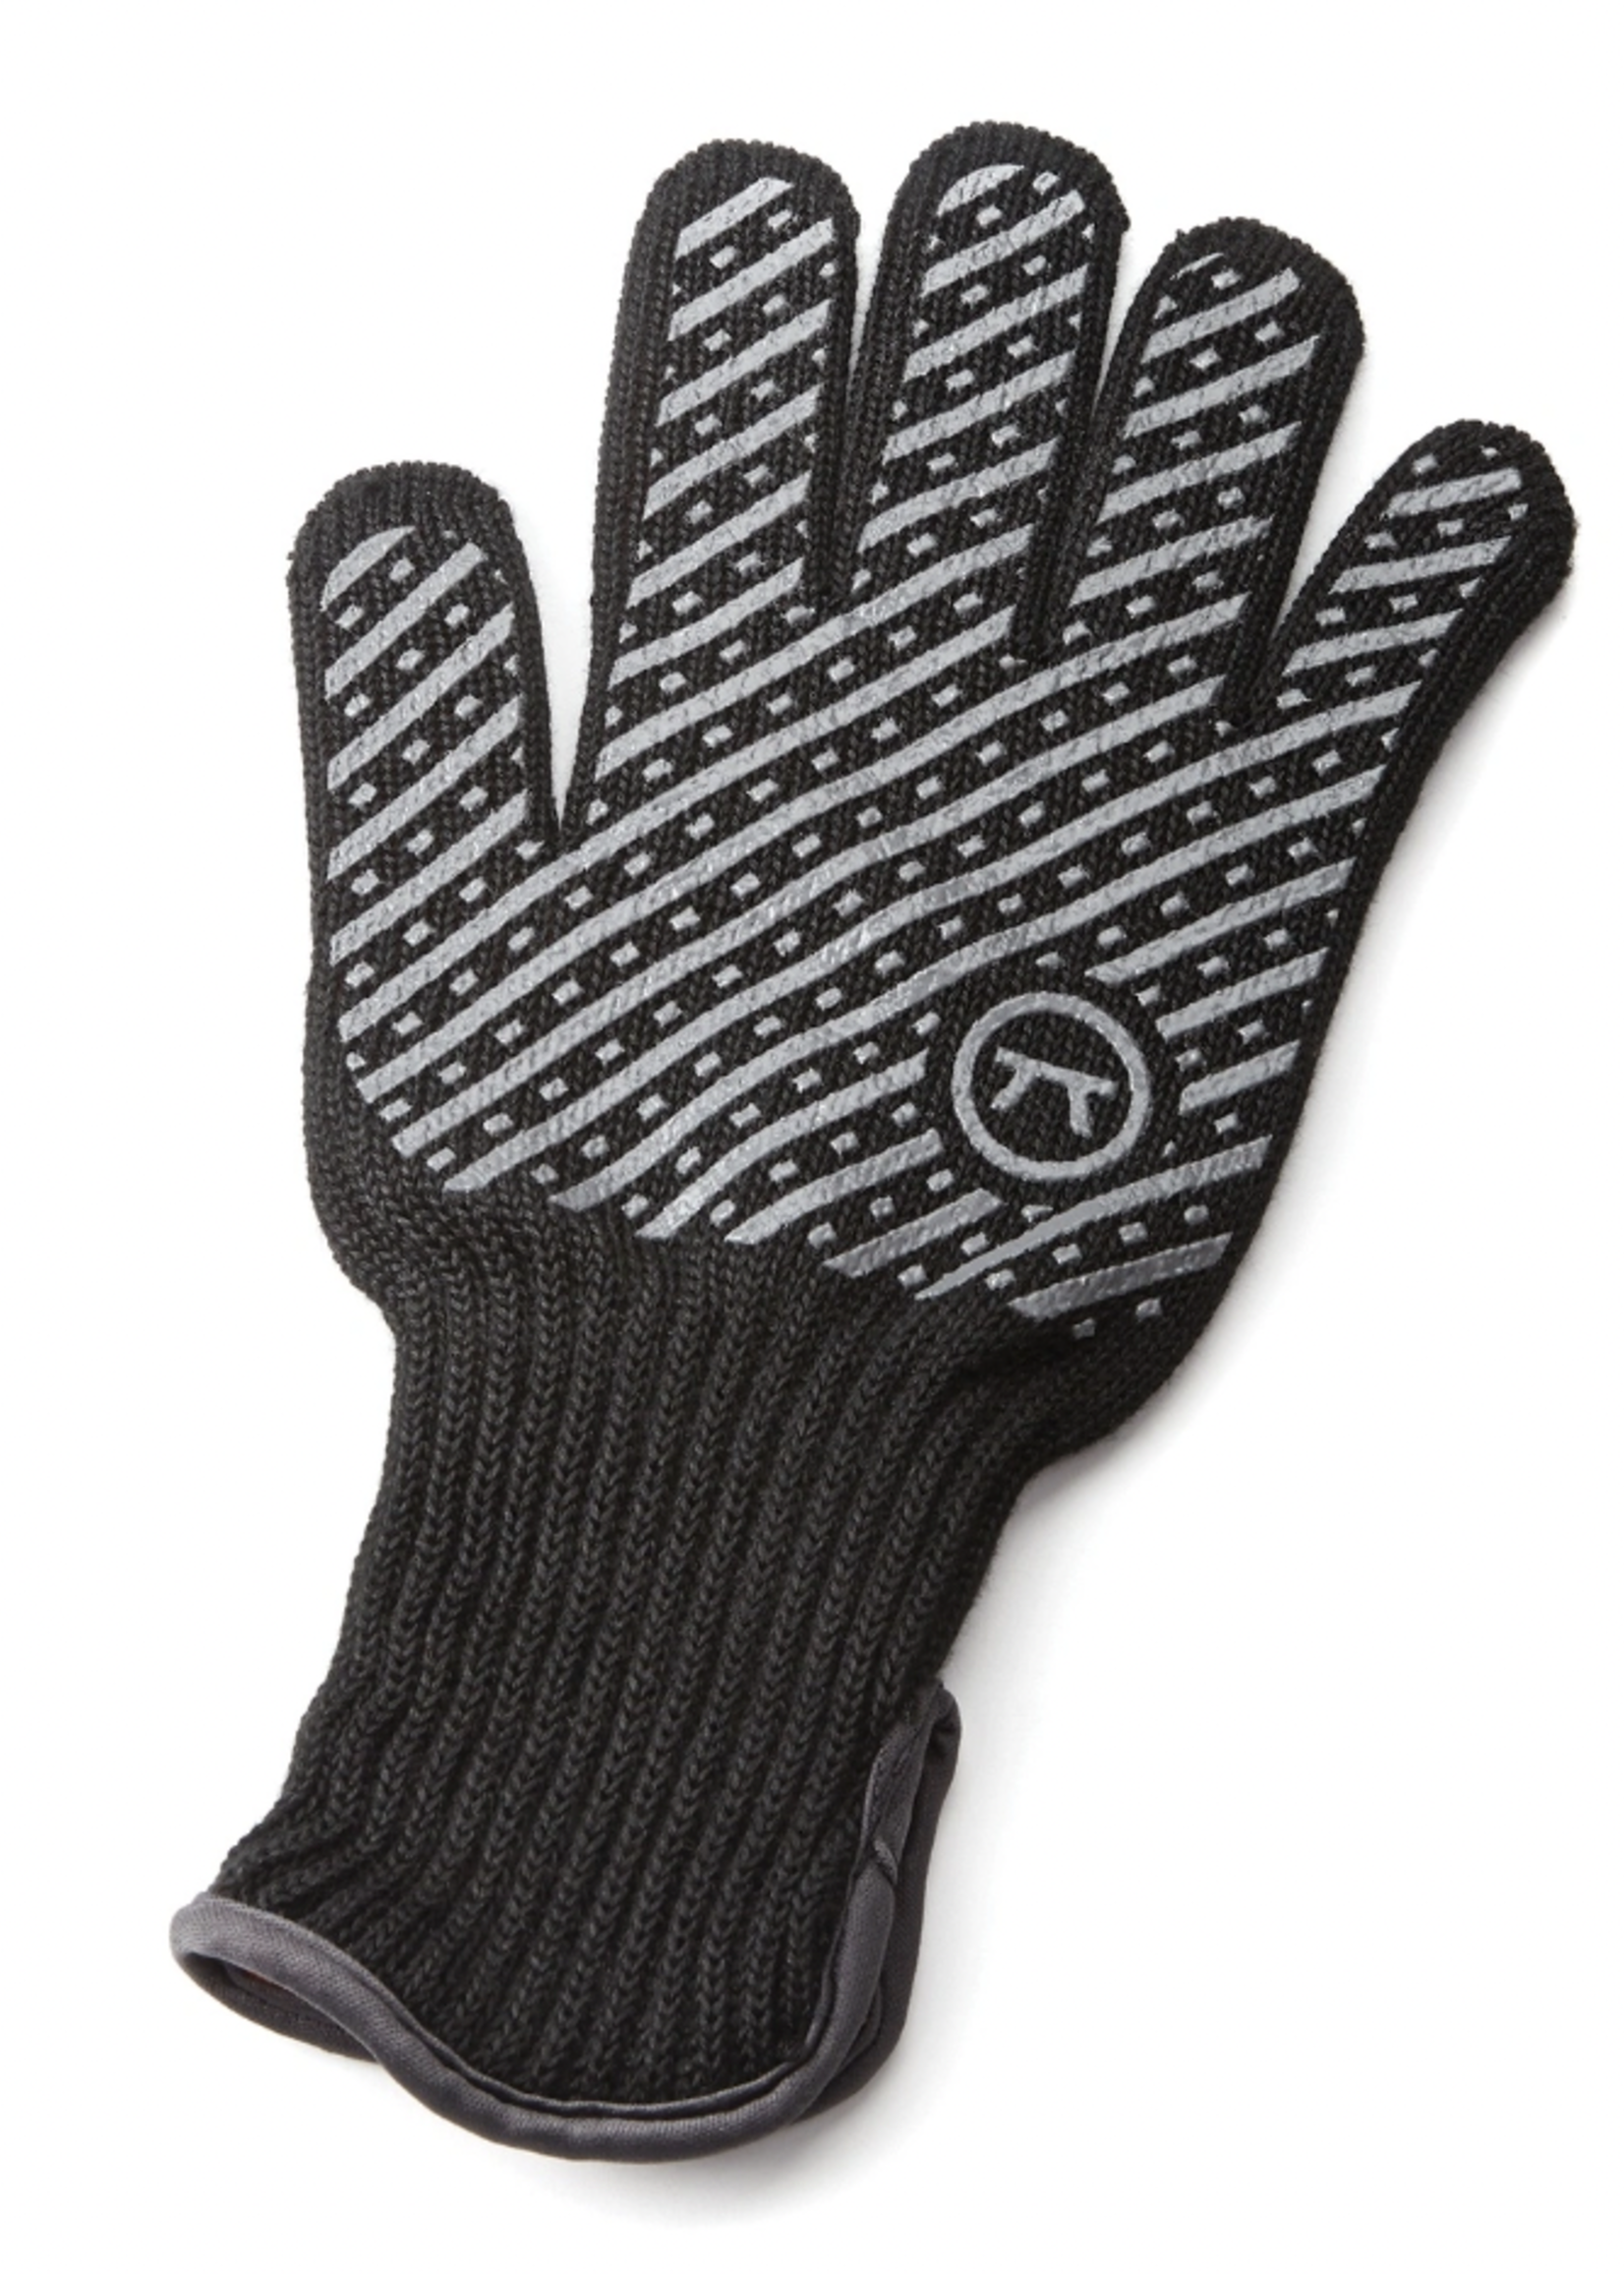 Outset Deluxe Grill & BBQ Glove SM/MED